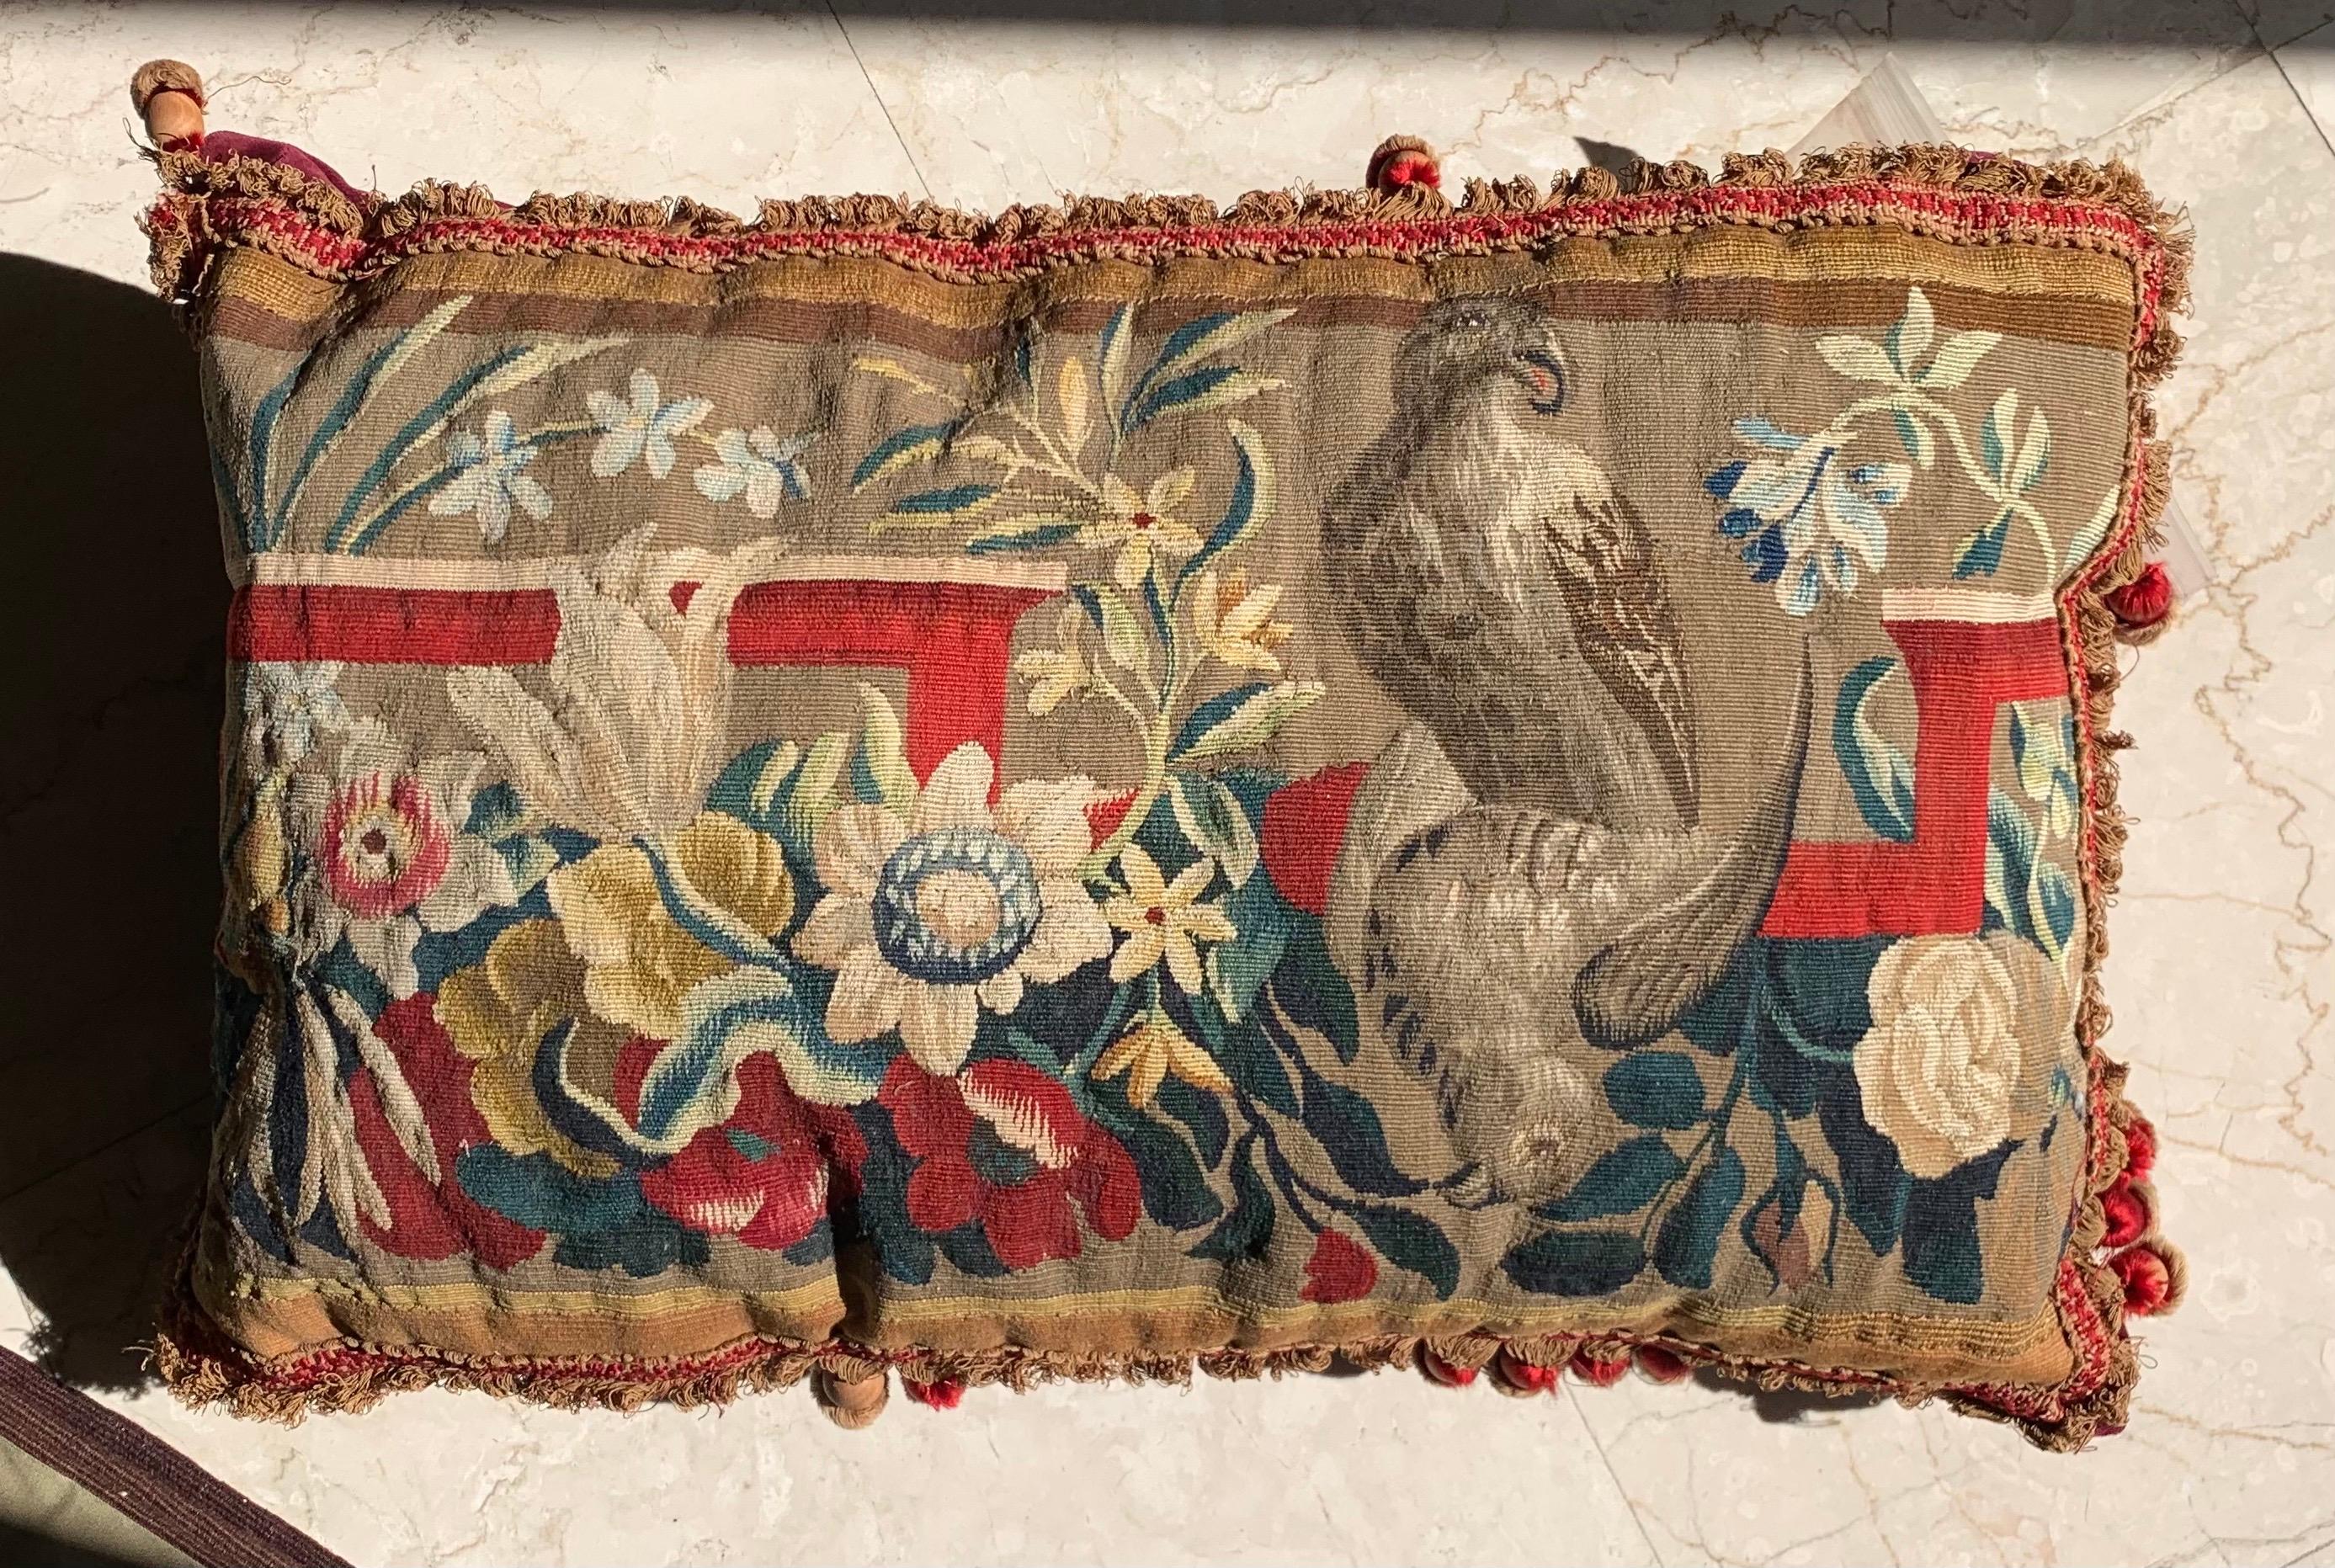 An exquisite pair of vibrant and stunning 17th Century Brussels Tapestry pillows with foliage and bird decor and petite tassels that will brighten up any sofa, canapé or settee! They are in excellent condition with velvet crimson backing and red